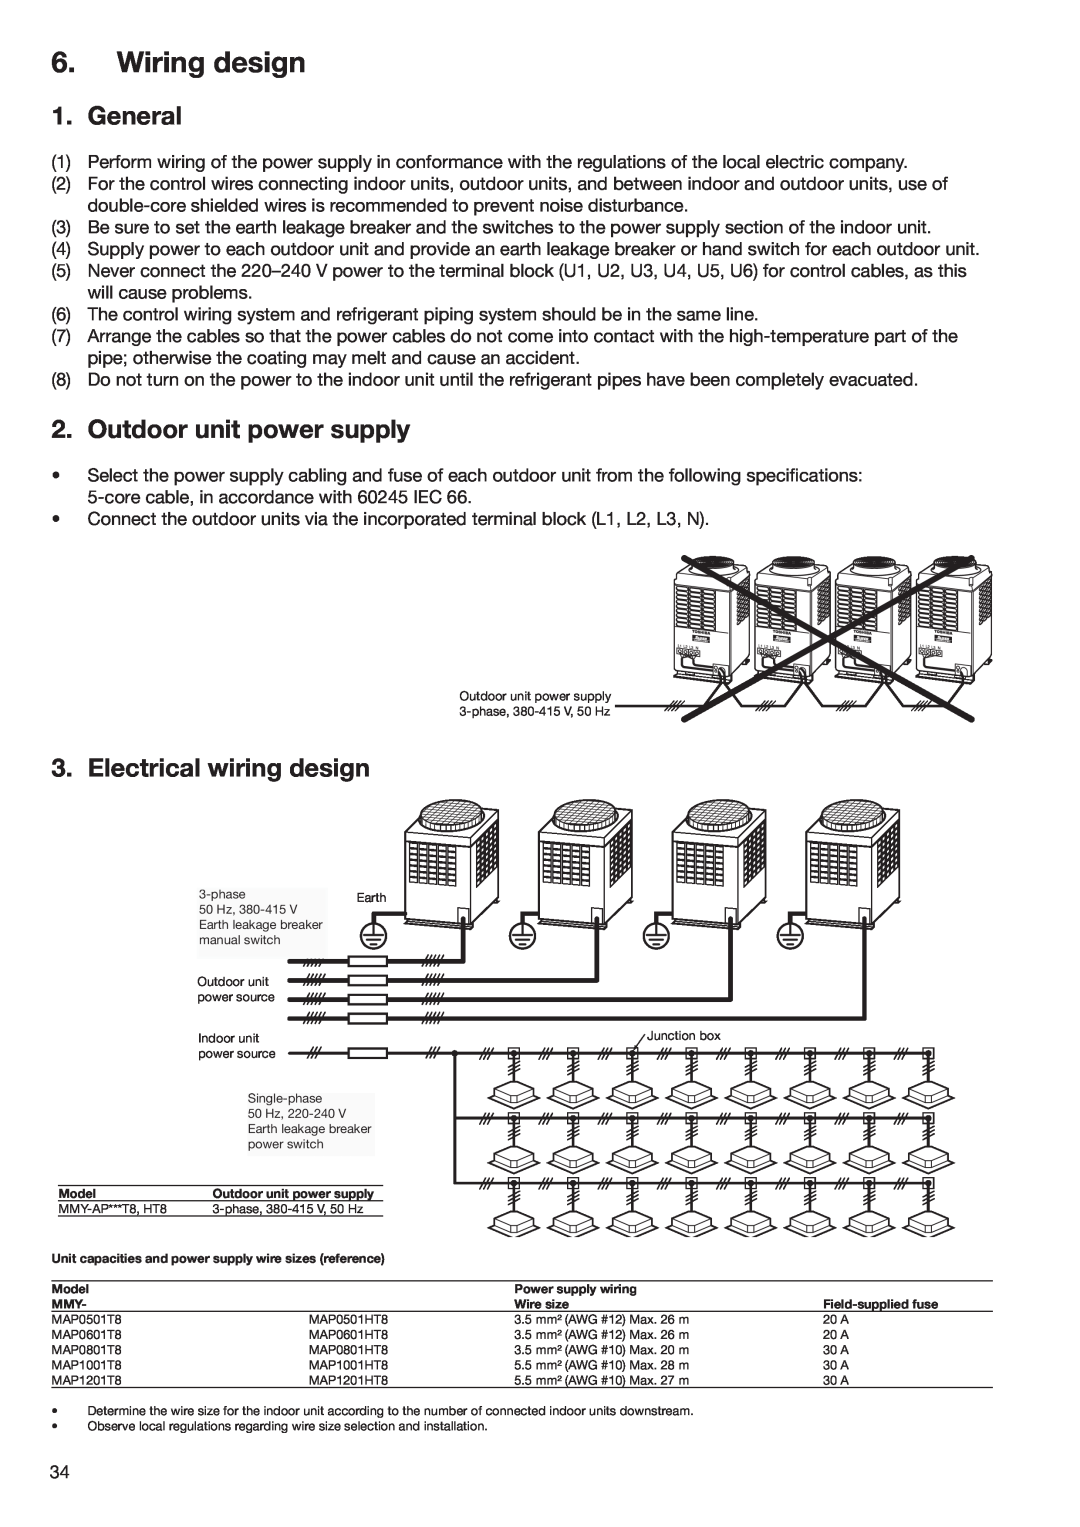 Toshiba HFC R-410A manual Wiring design, General, Outdoor unit power supply, Electrical wiring design 